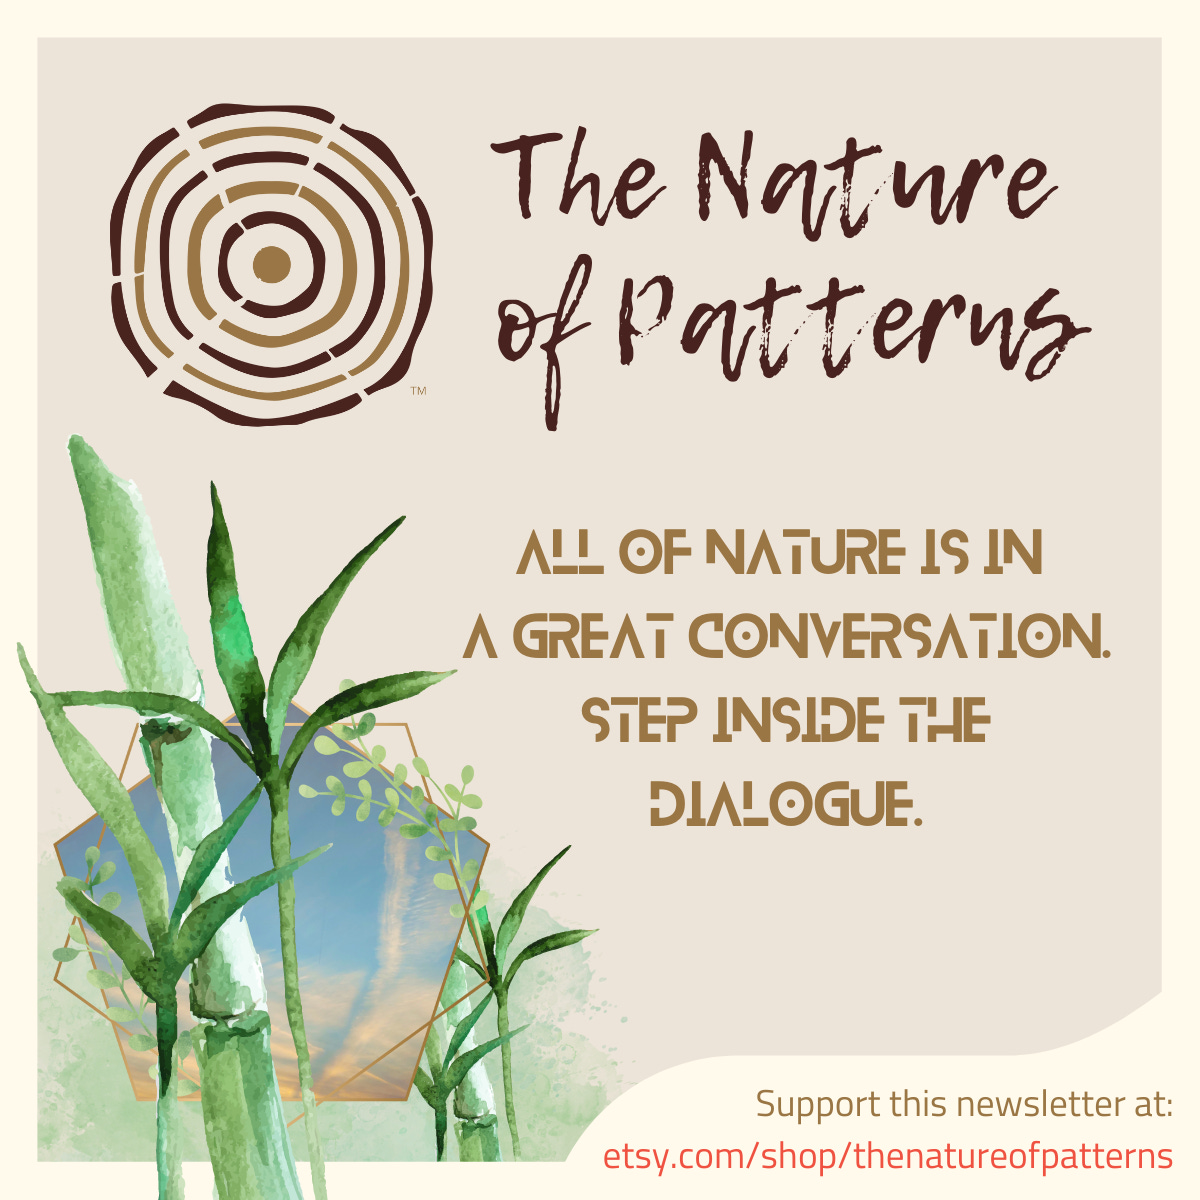 The Nature of Patterns